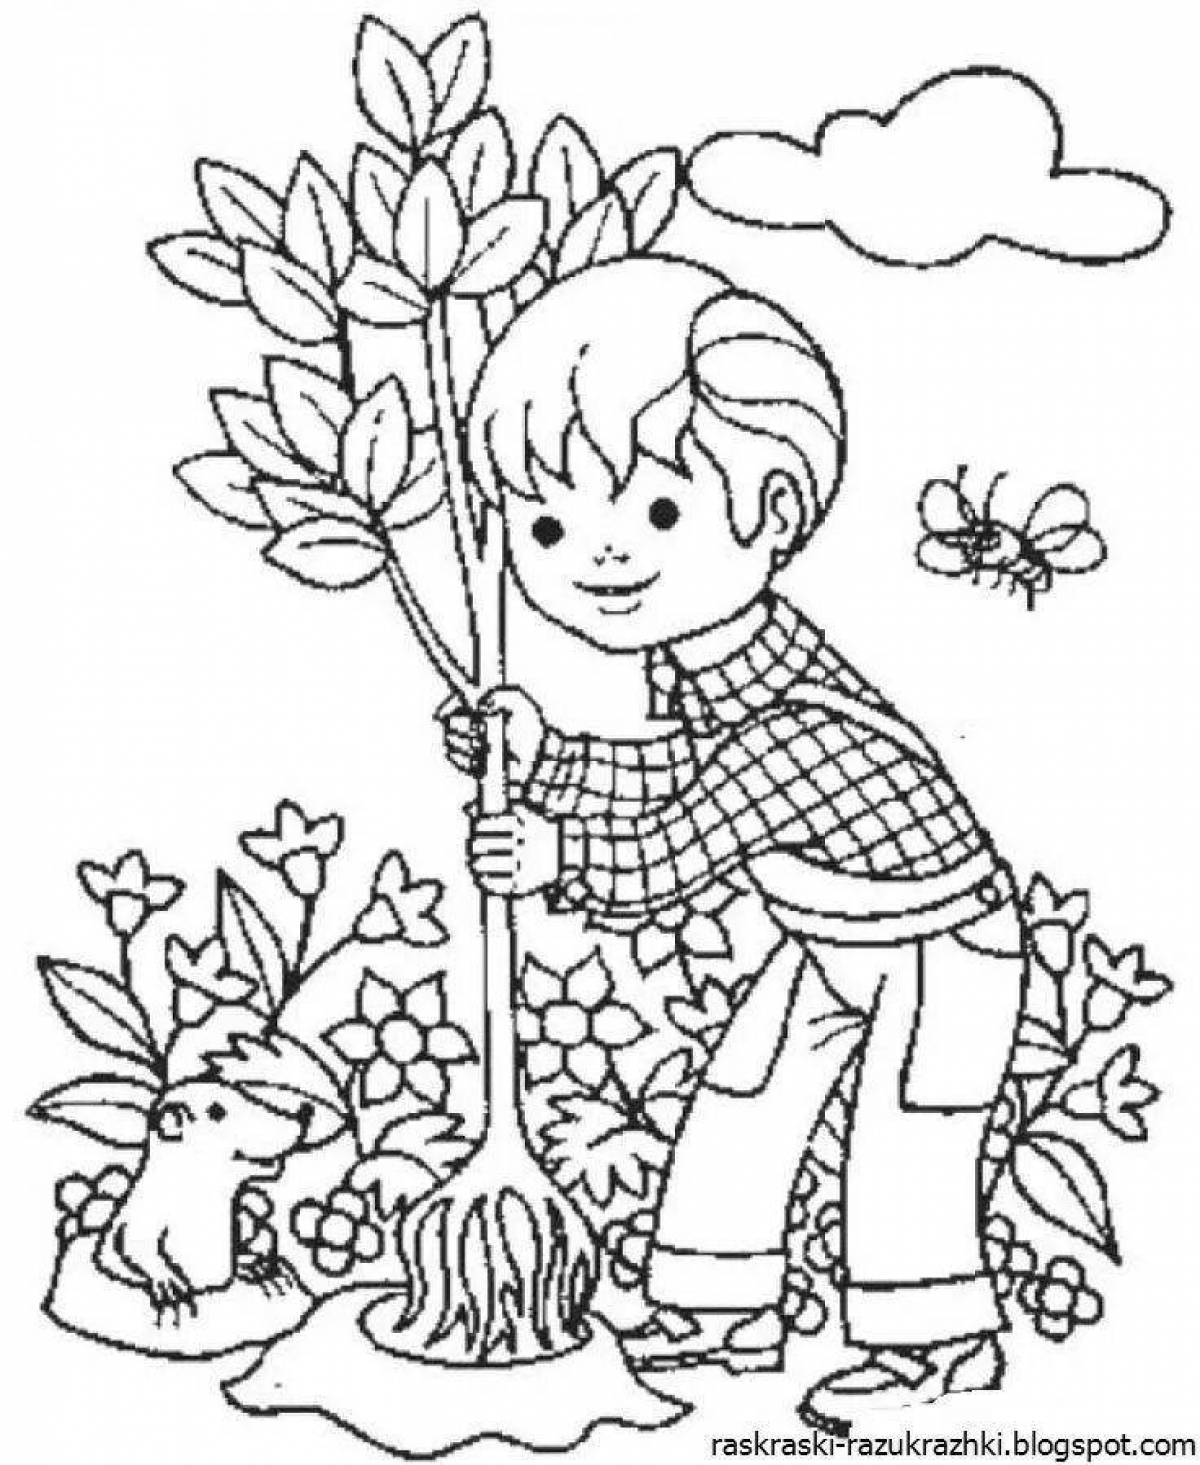 Jovial ecology coloring book